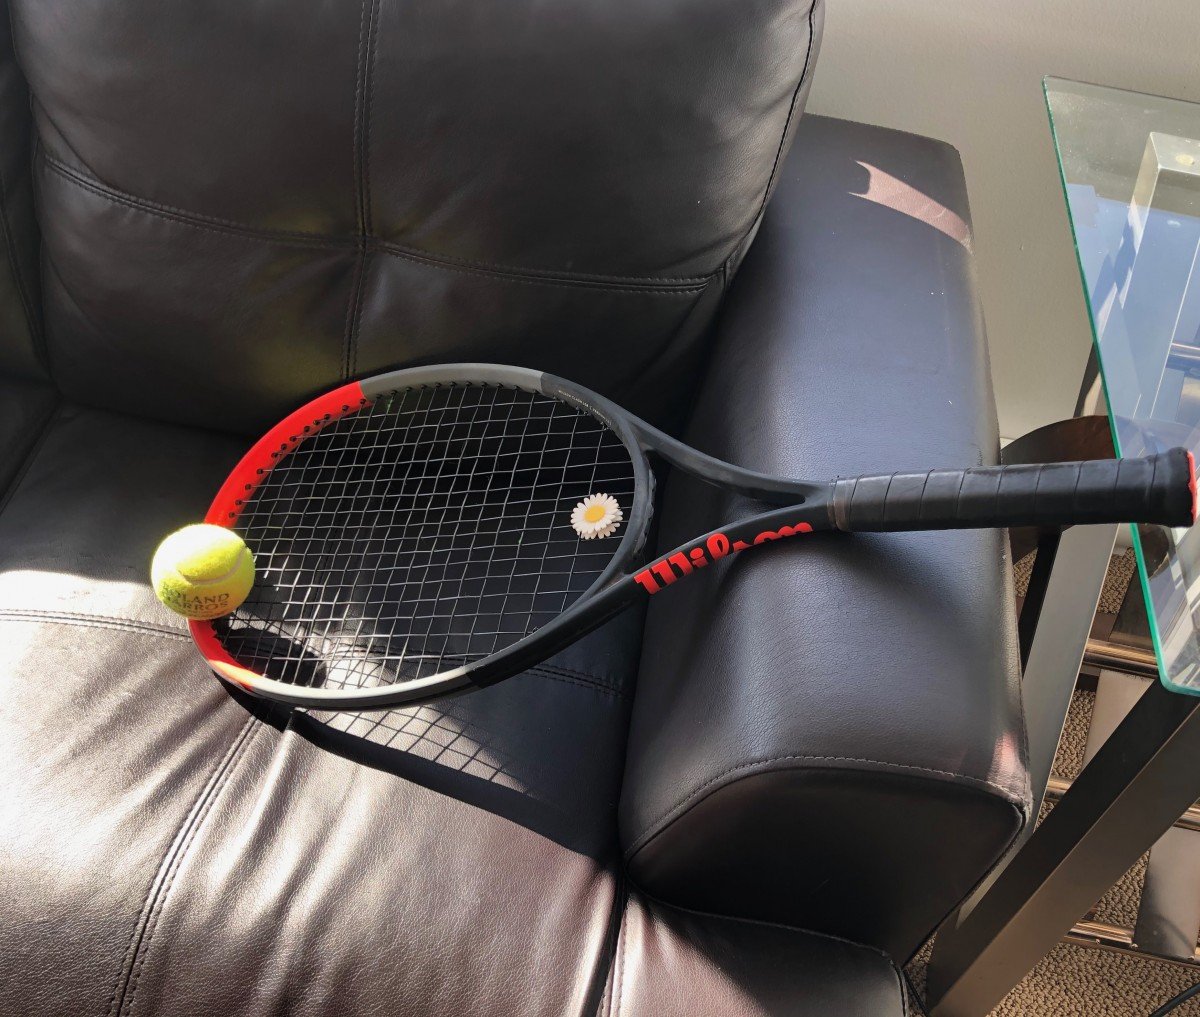 Tennis Training Tools for At-Home Practice